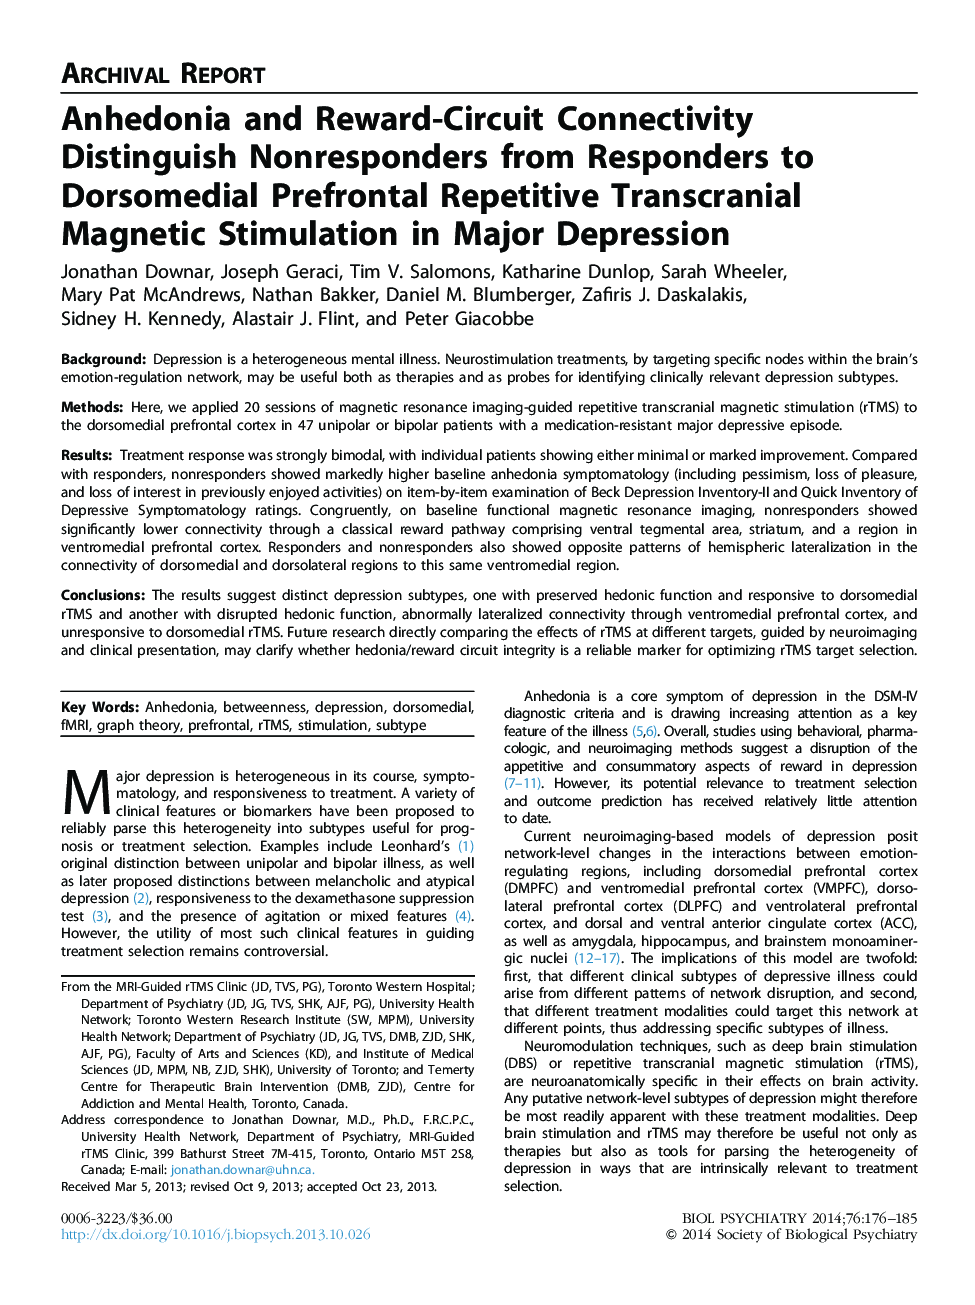 Anhedonia and Reward-Circuit Connectivity Distinguish Nonresponders from Responders to Dorsomedial Prefrontal Repetitive Transcranial Magnetic Stimulation in Major Depression